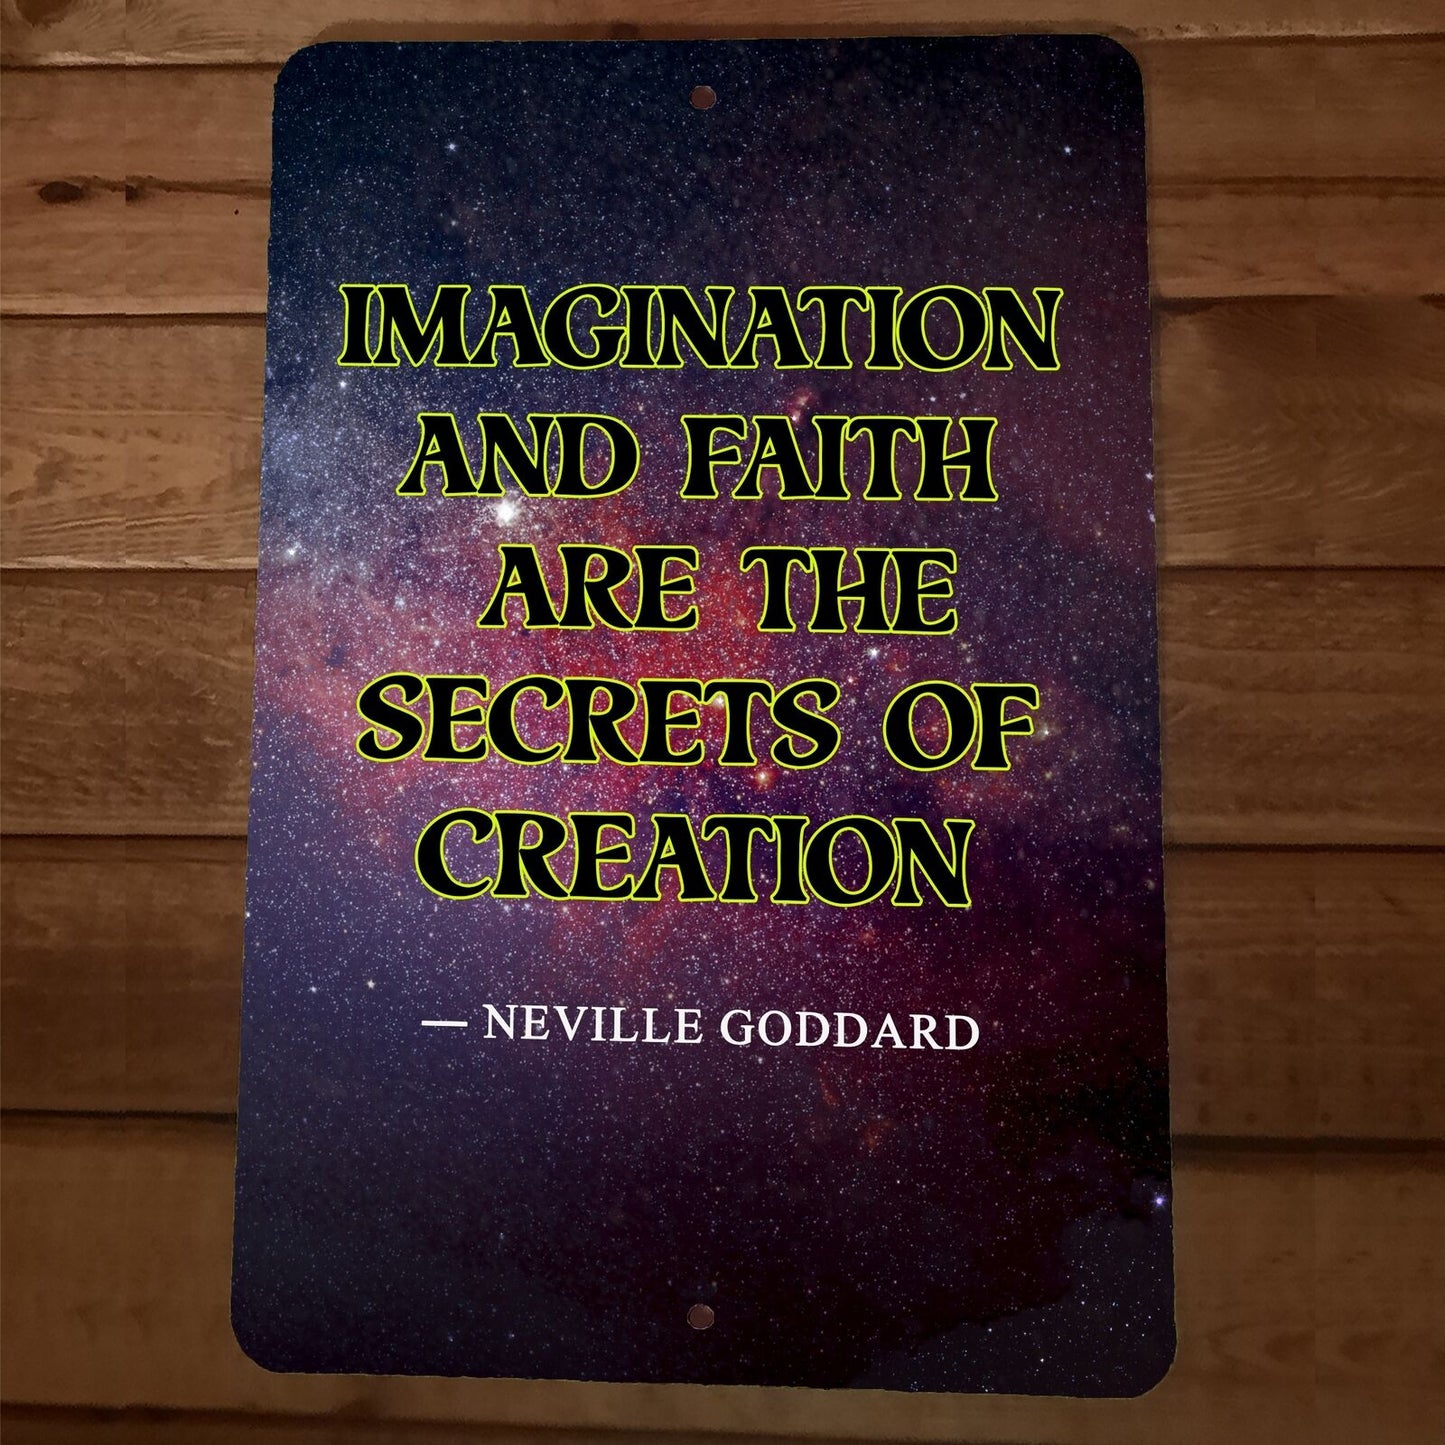 Imagination and Faith Are The Secrets of Creation Quote 8x12 Metal Wall Sign